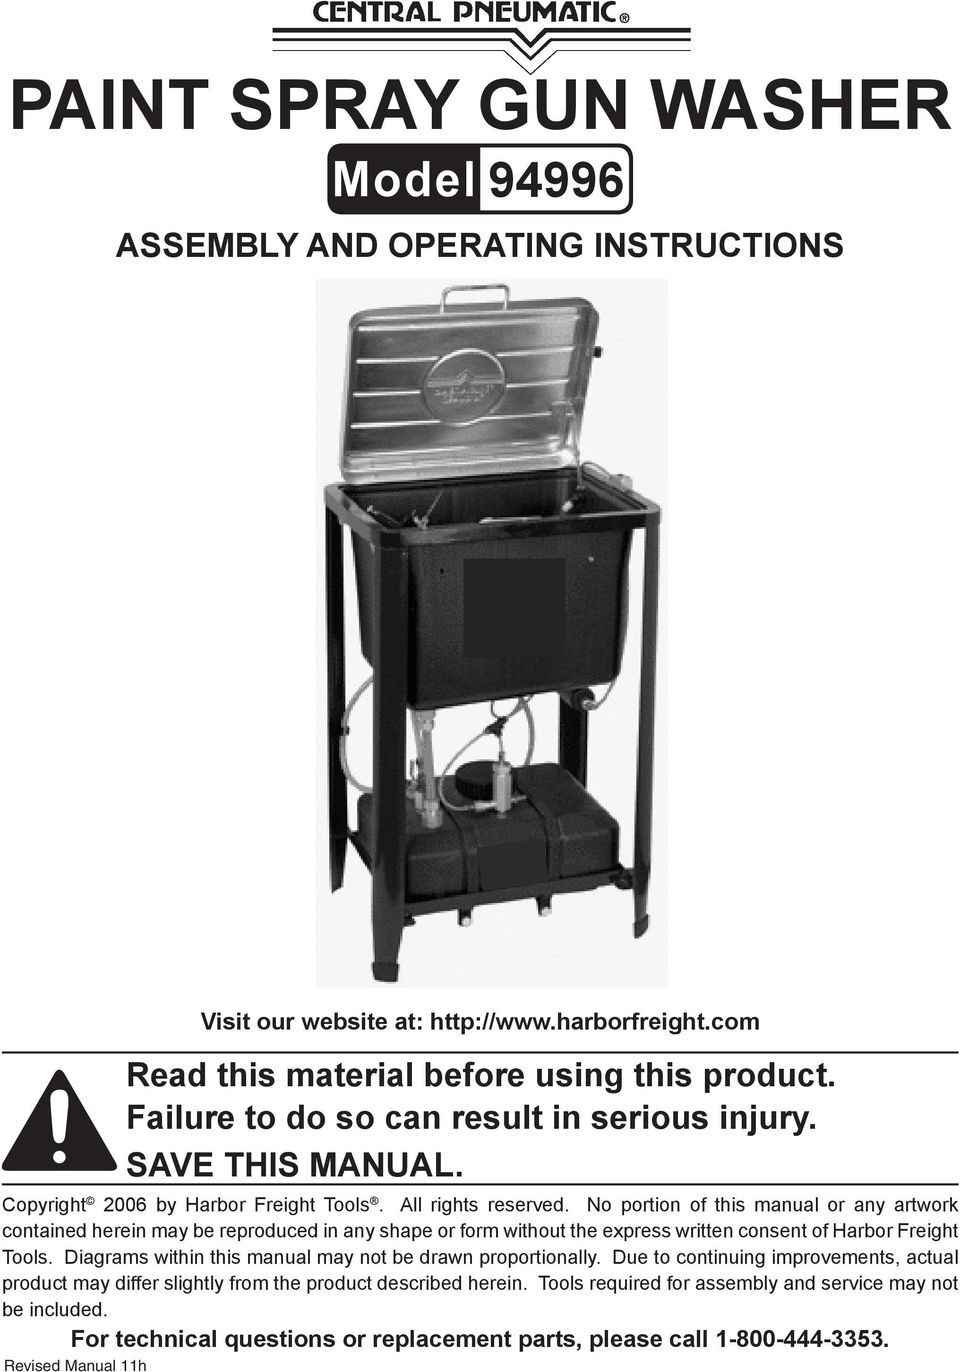 No portion of this manual or any artwork contained herein may be reproduced in any shape or form without the express written consent of Harbor Freight Tools.